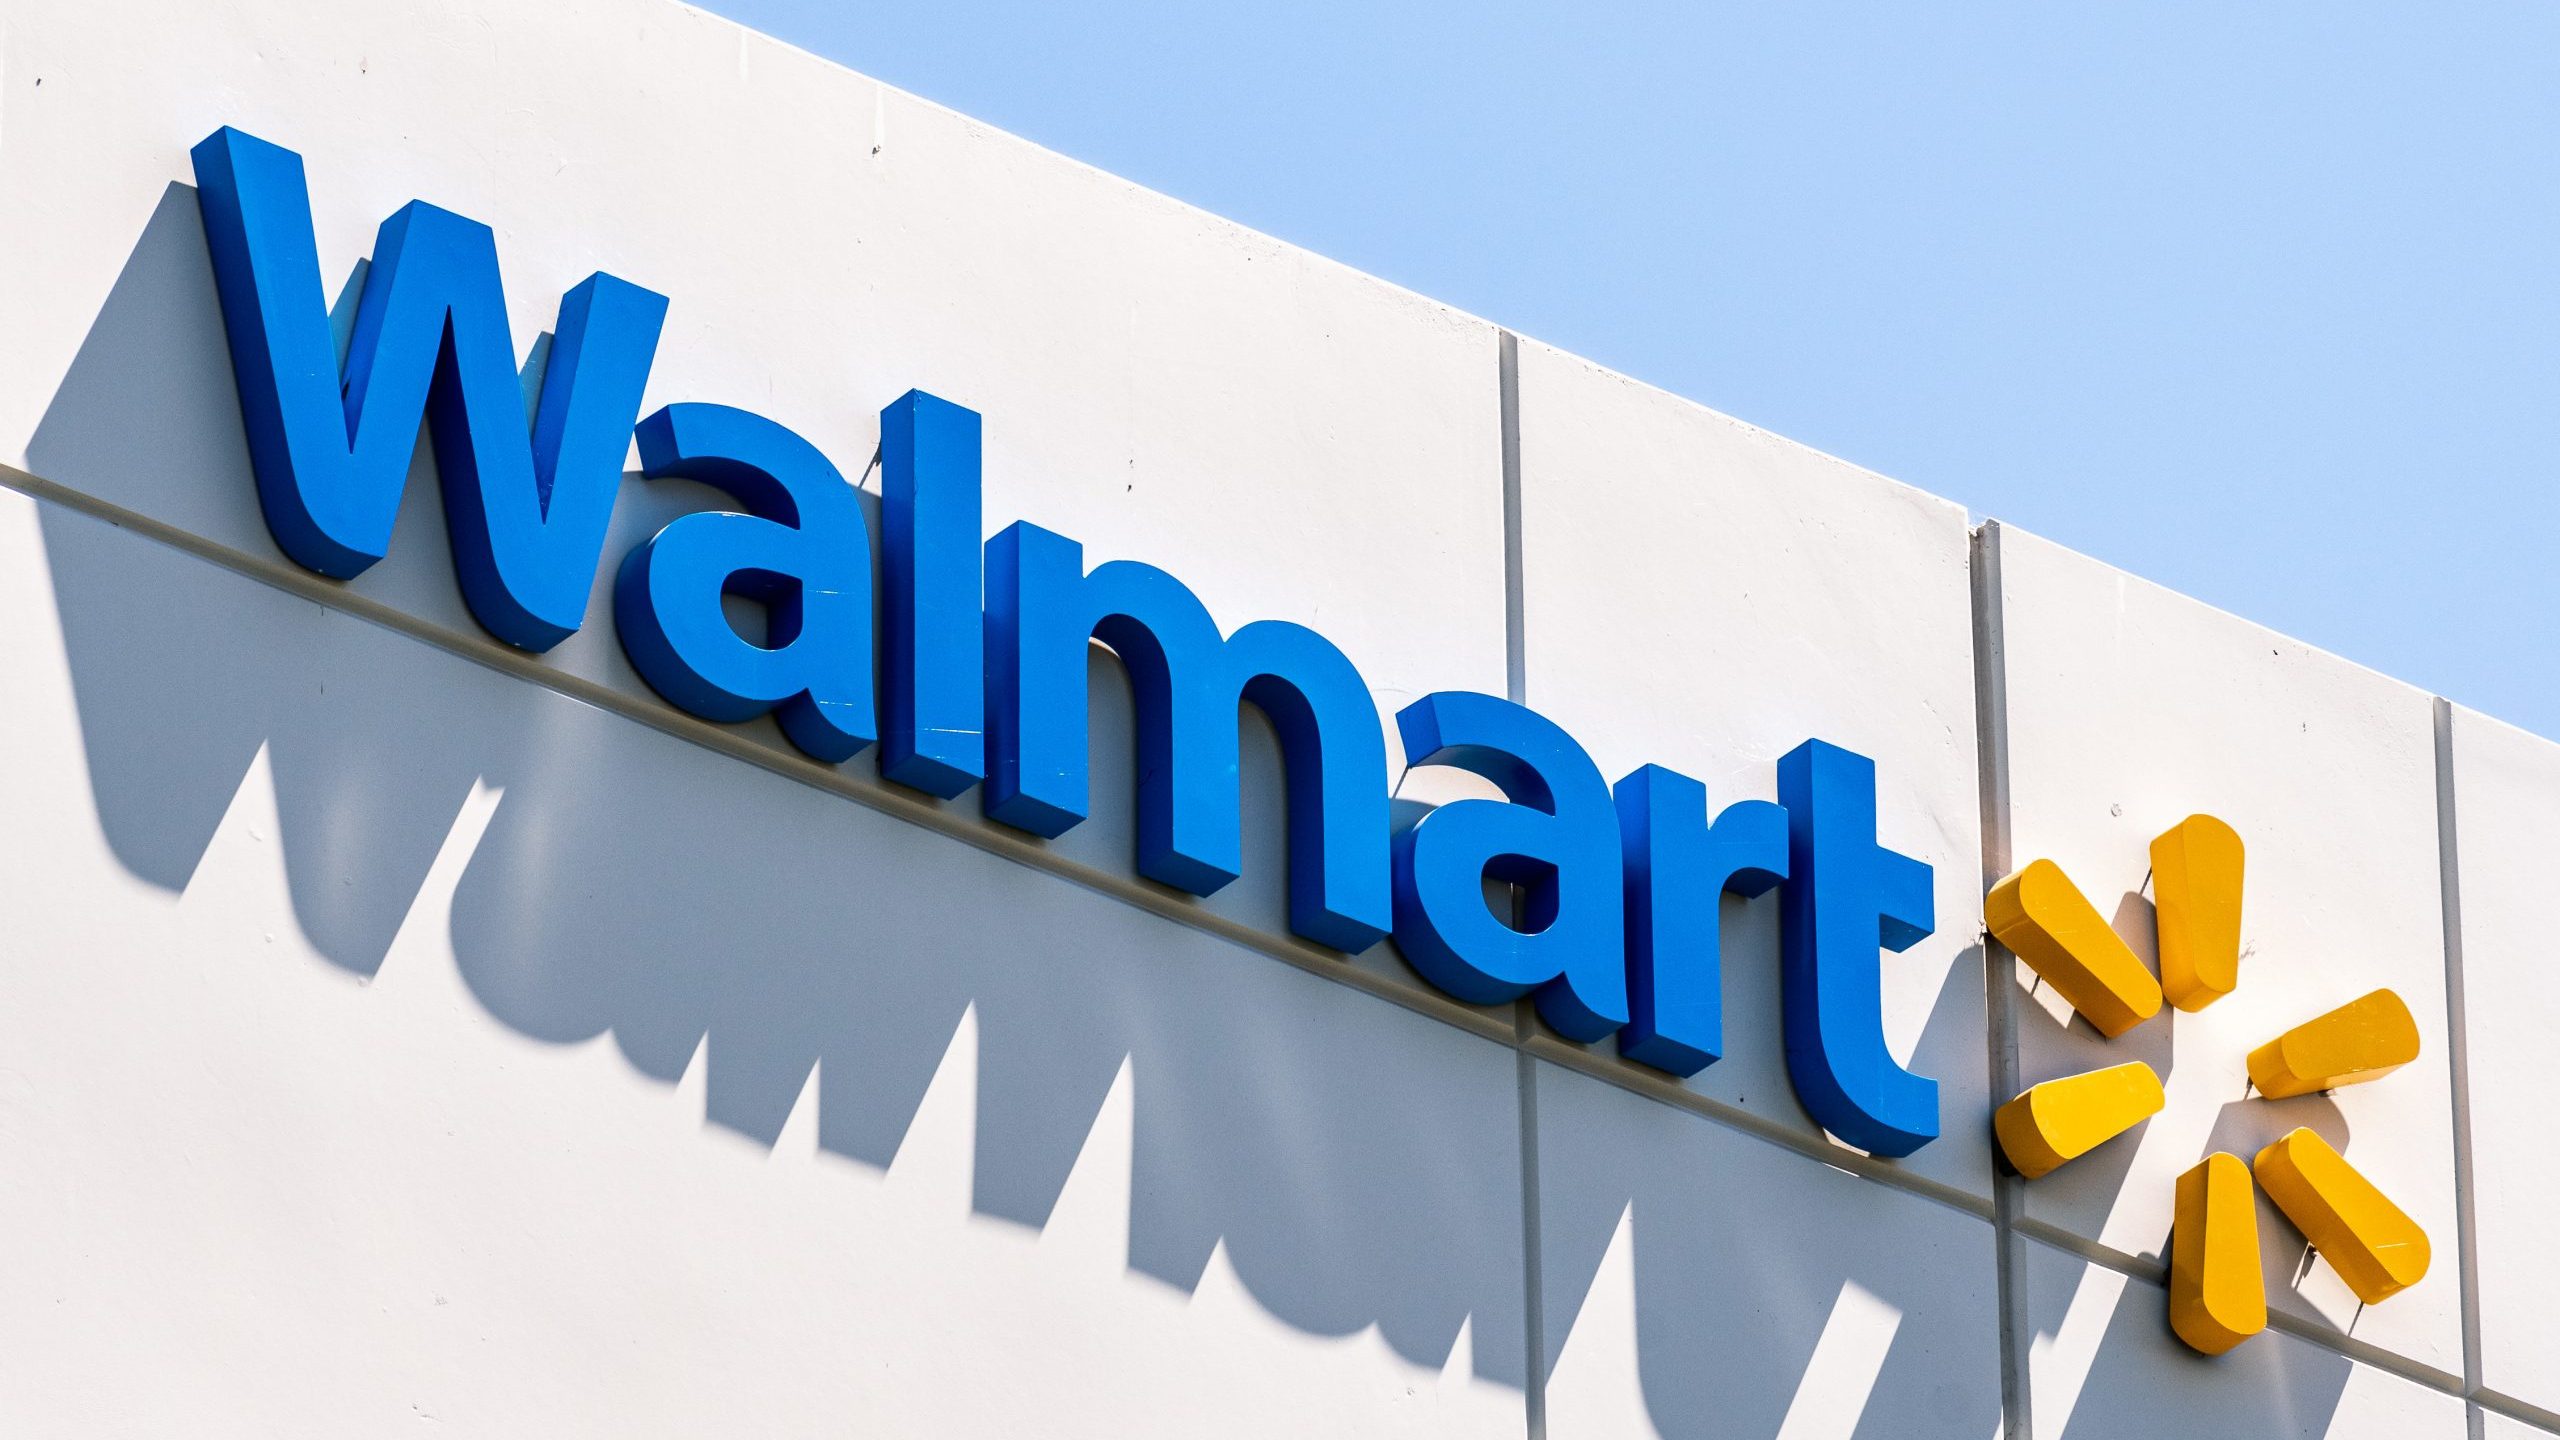 Walmart’s Black Friday deals start early this year and include a 42-inch smart TV for $88